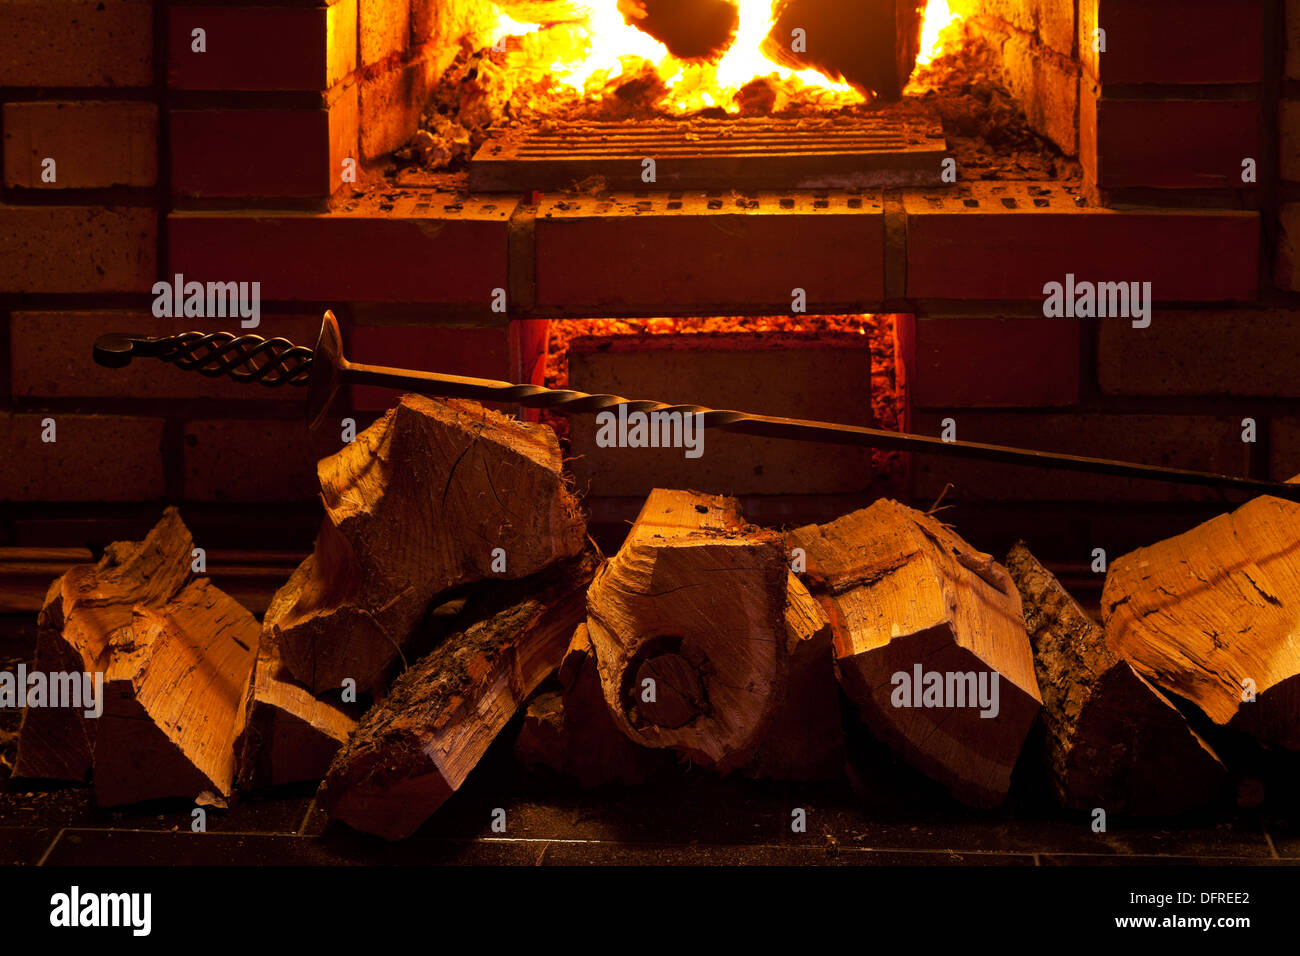 poker, firewood and near fireplace in evening time Stock Photo